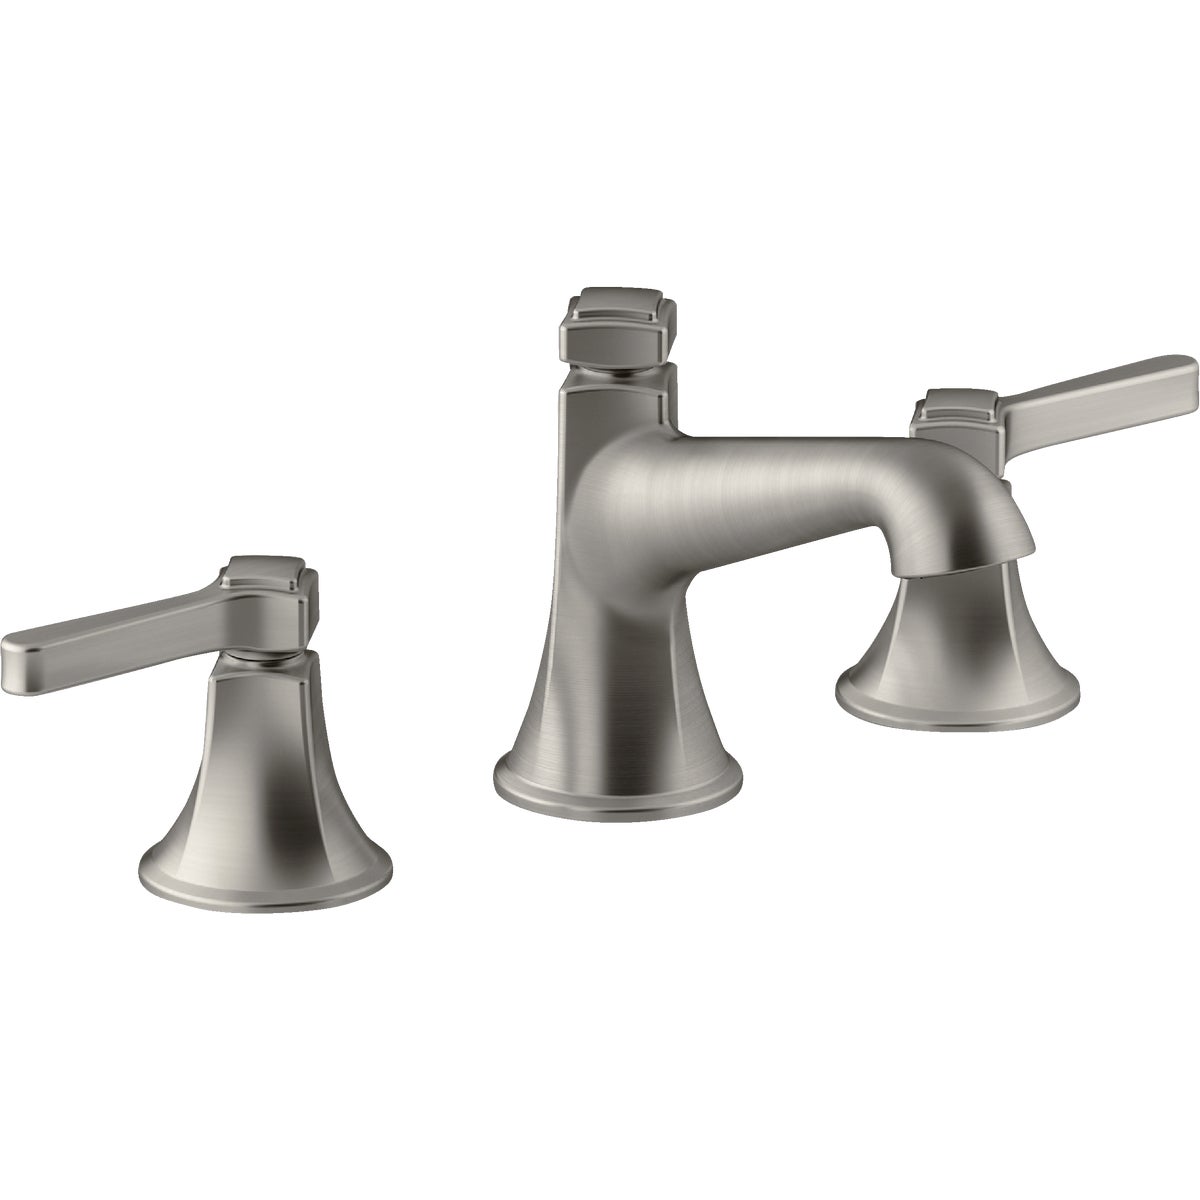 Kohler Georgeson Brushed Nickel 2-Handle Lever 8 In. to 16 In. Widespread Bathroom Faucet with Pop-Up